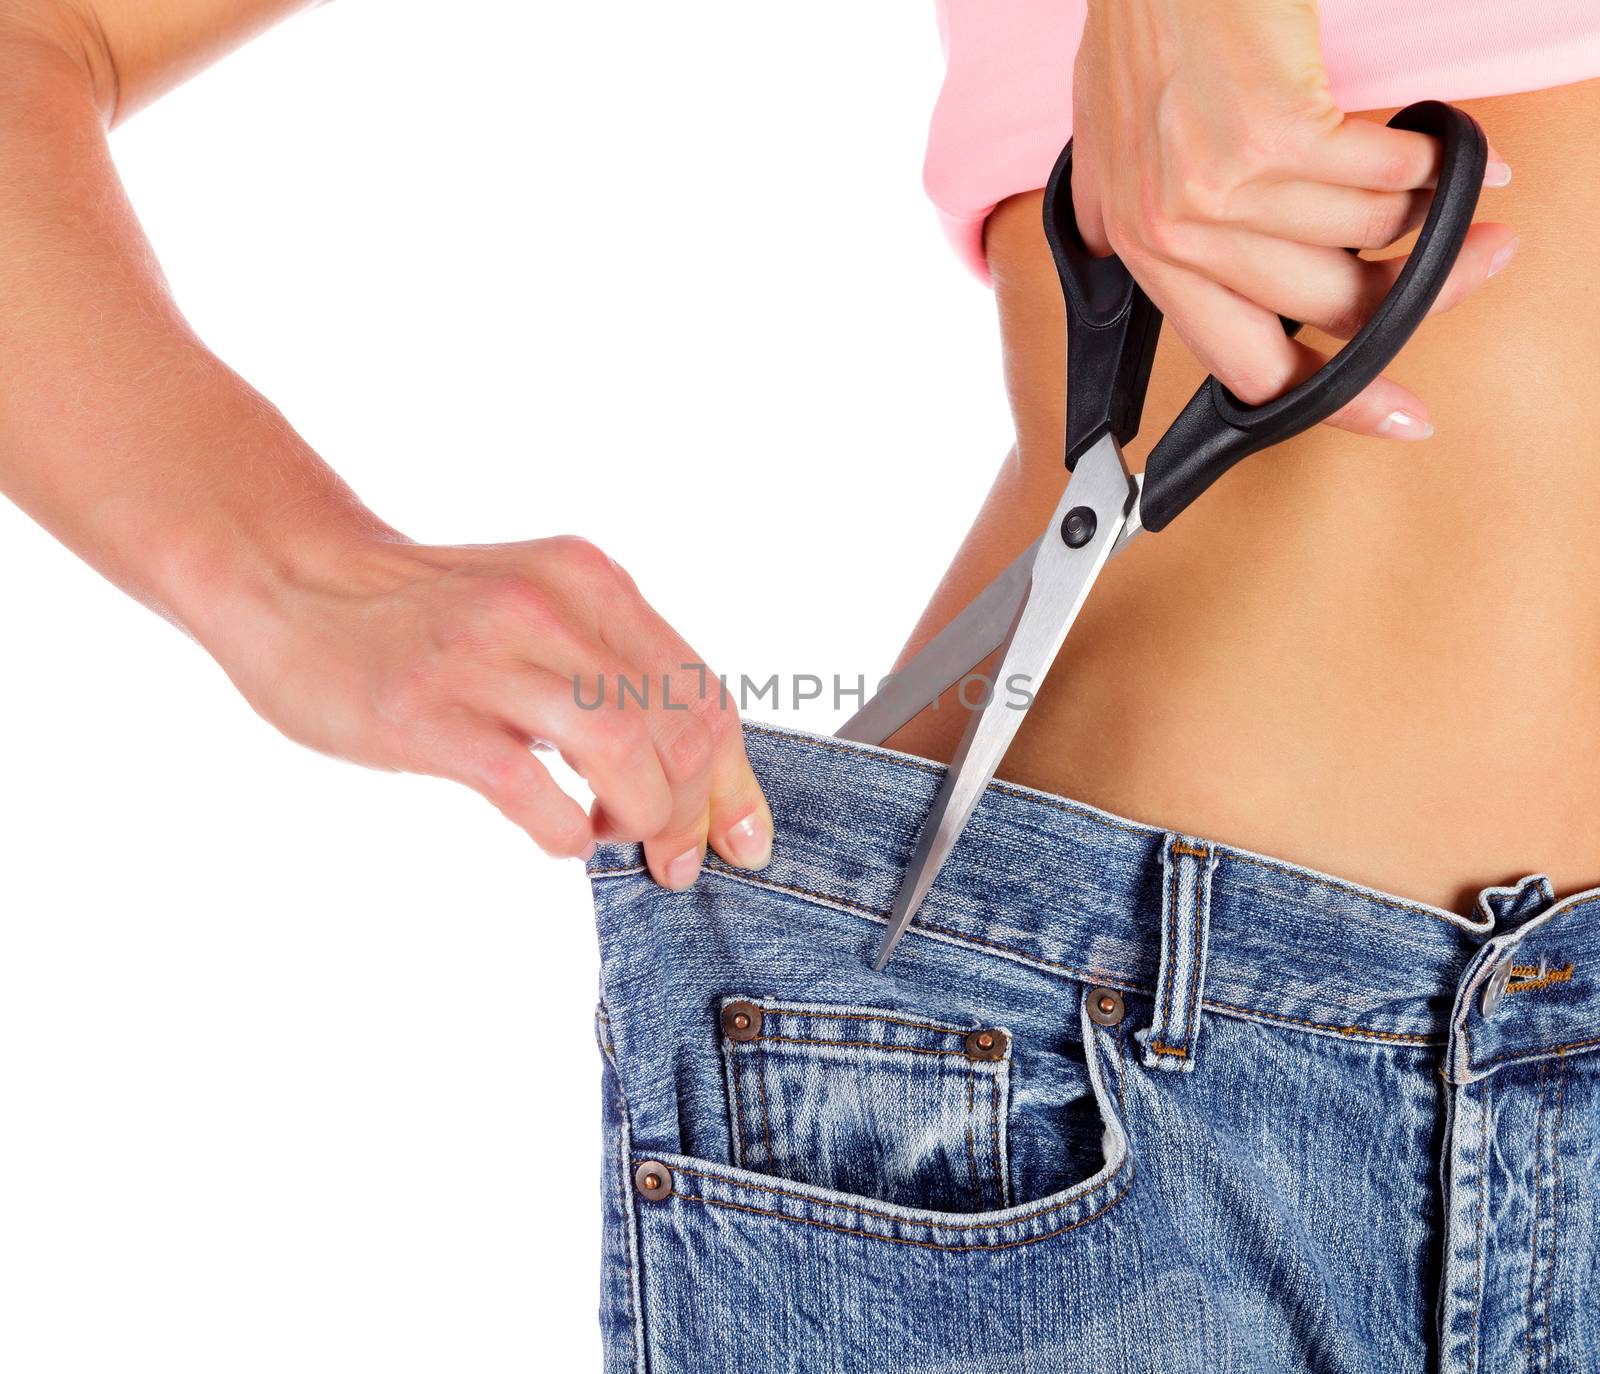 Weight loss concept - closeup shot of woman showing her progress of losing weight. Isolated on white background.